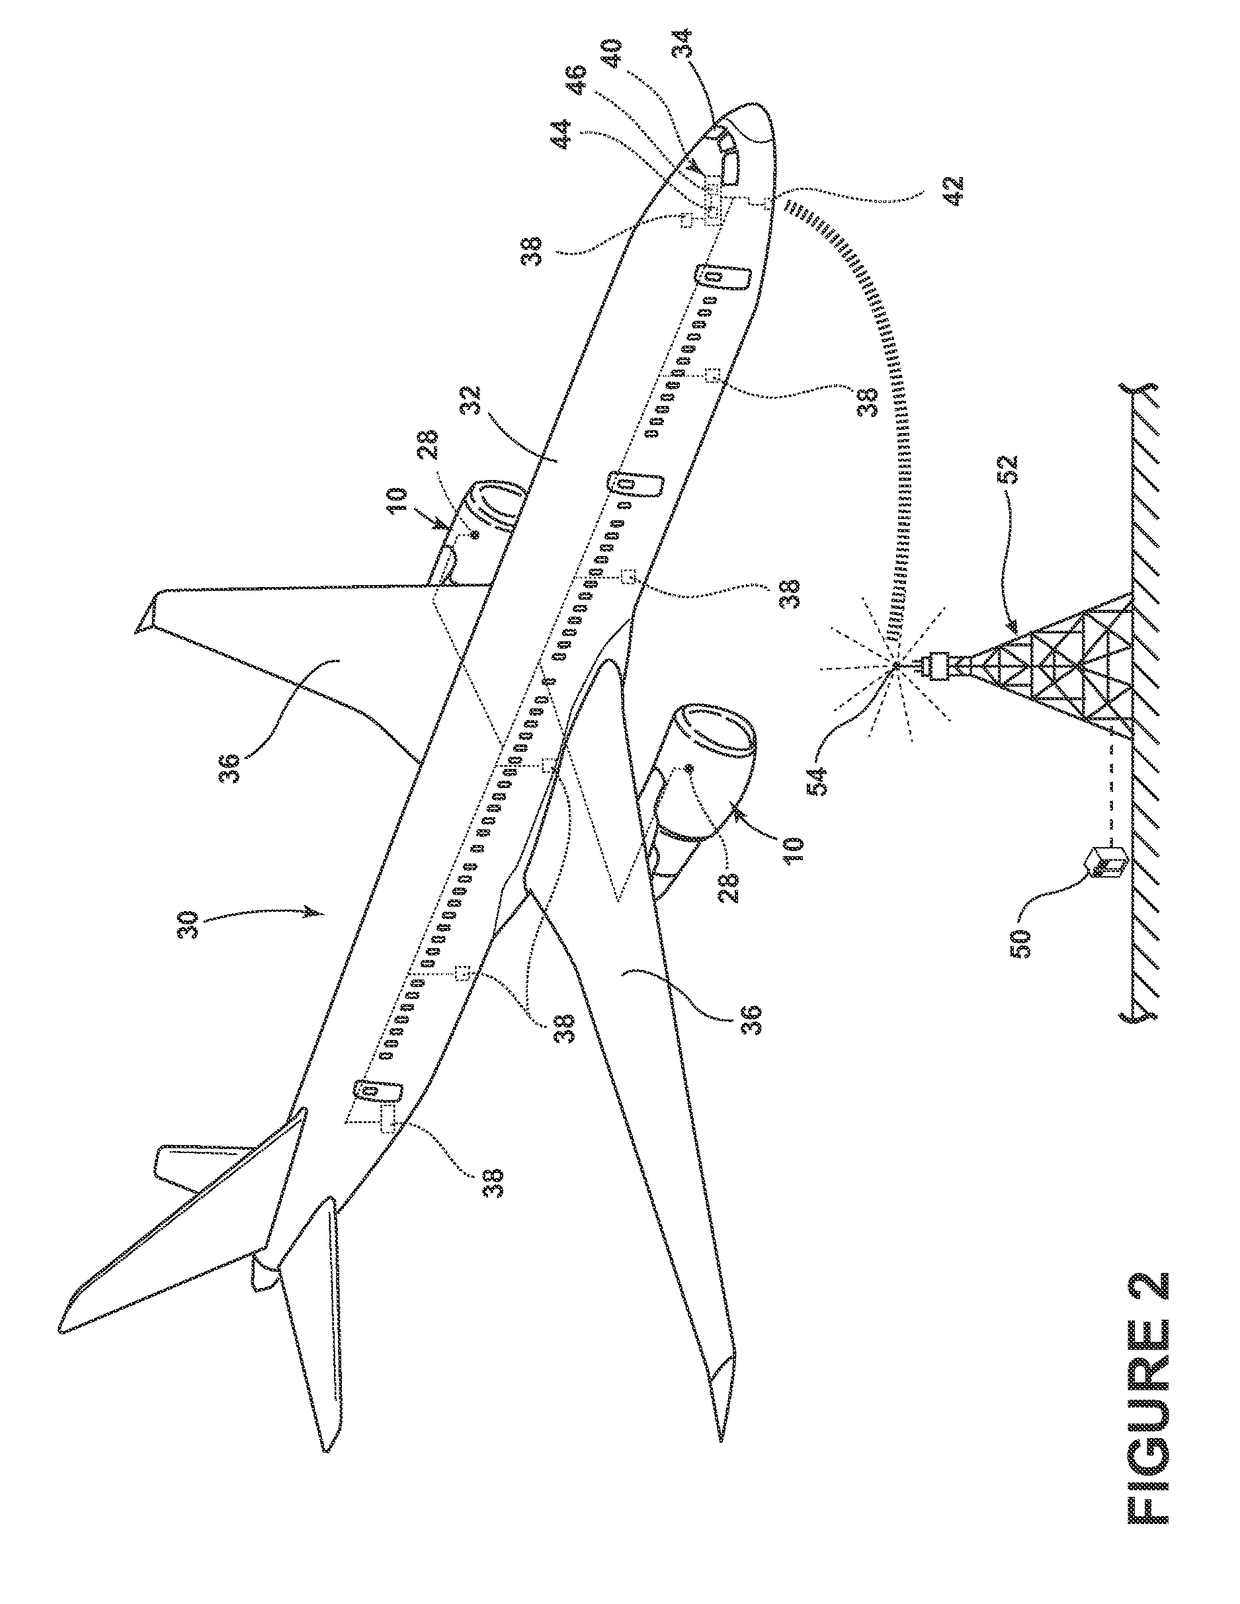 Aircraft and particulate detection method